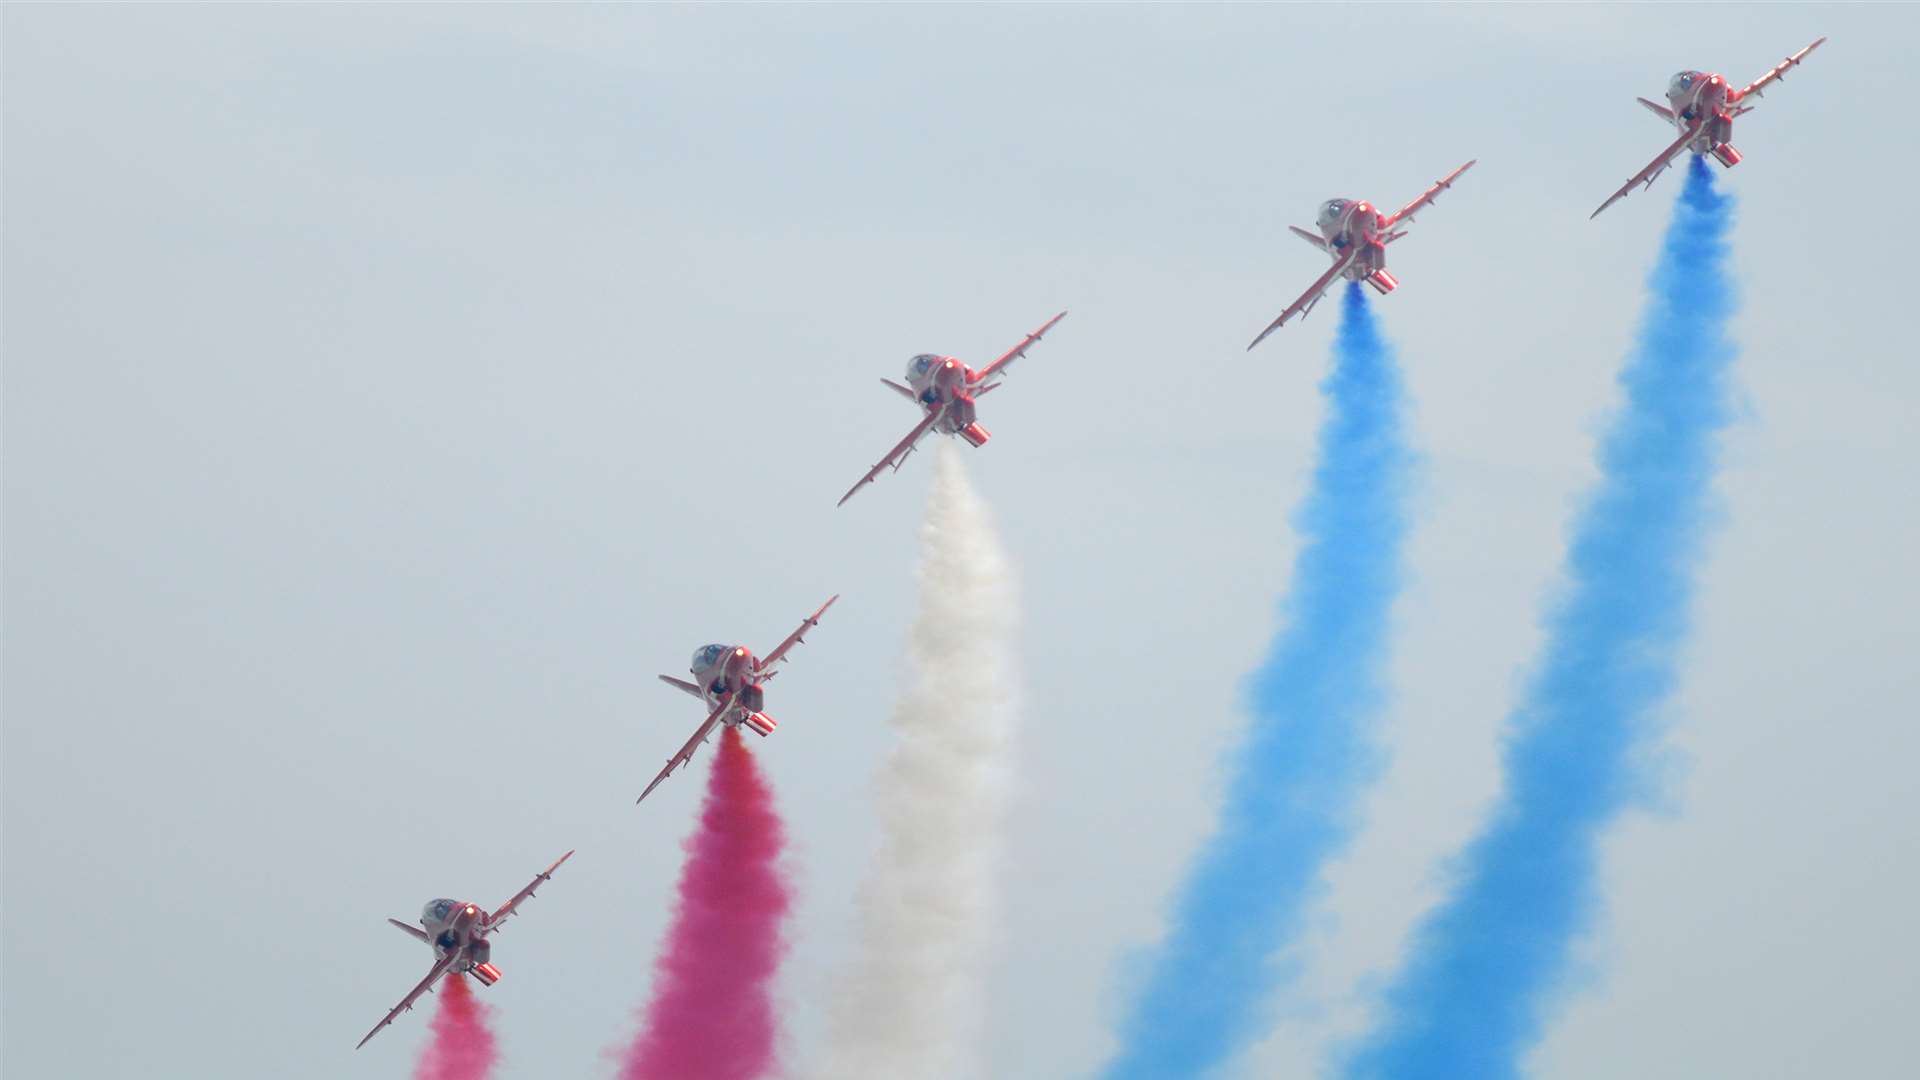 The Red Arrows at Herne Bay Air Show last year. Picture: Ruth Cuerden